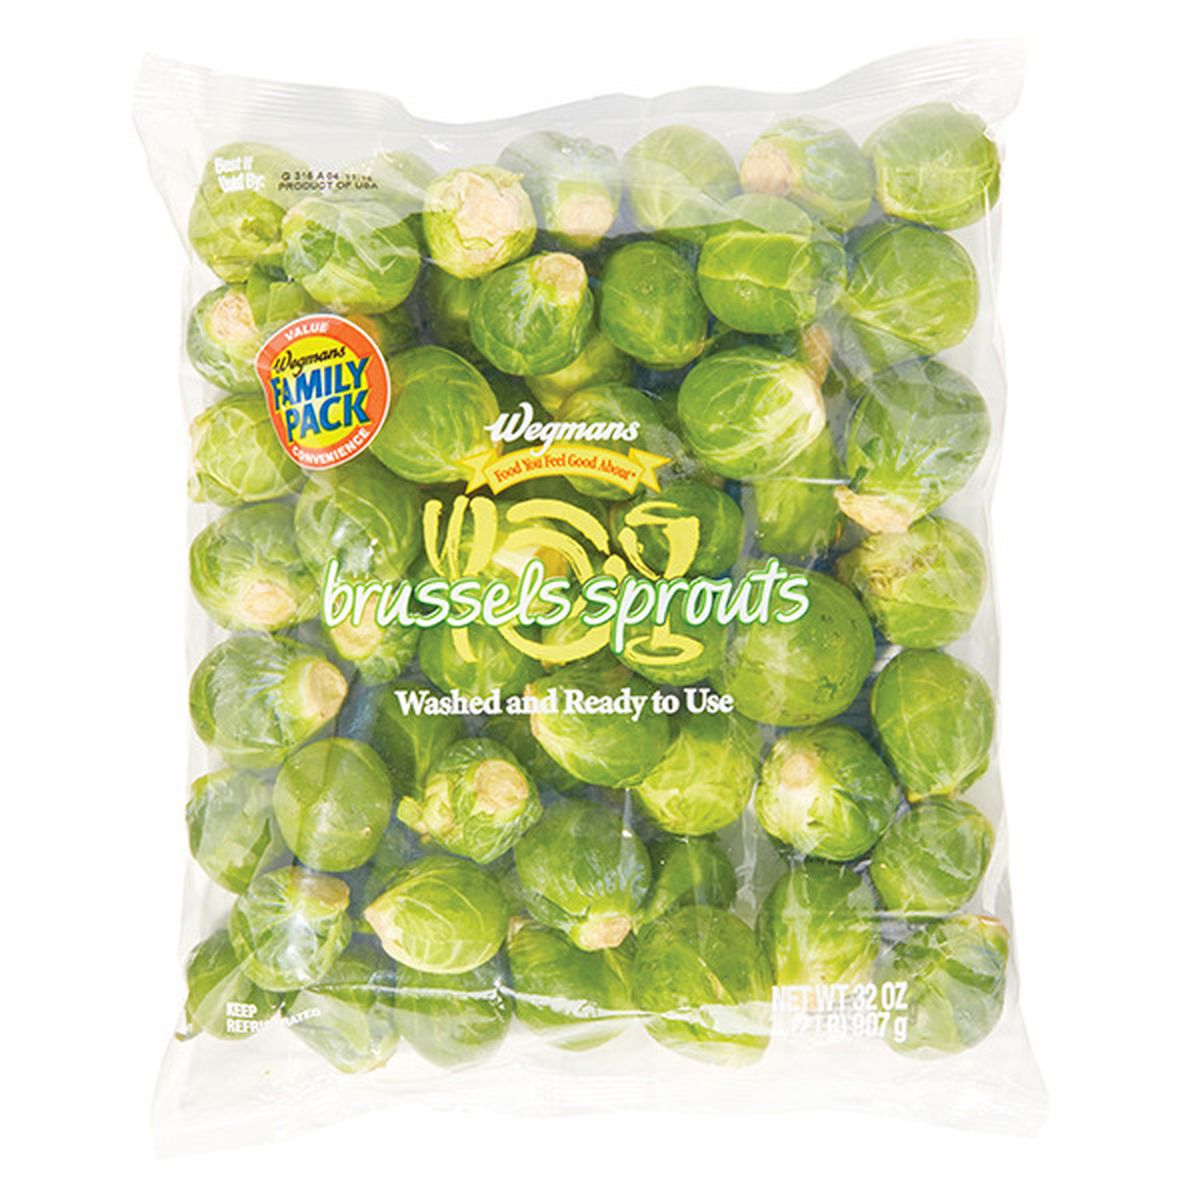 Calories in Wegmans Brussels Sprouts, FAMILY PACK